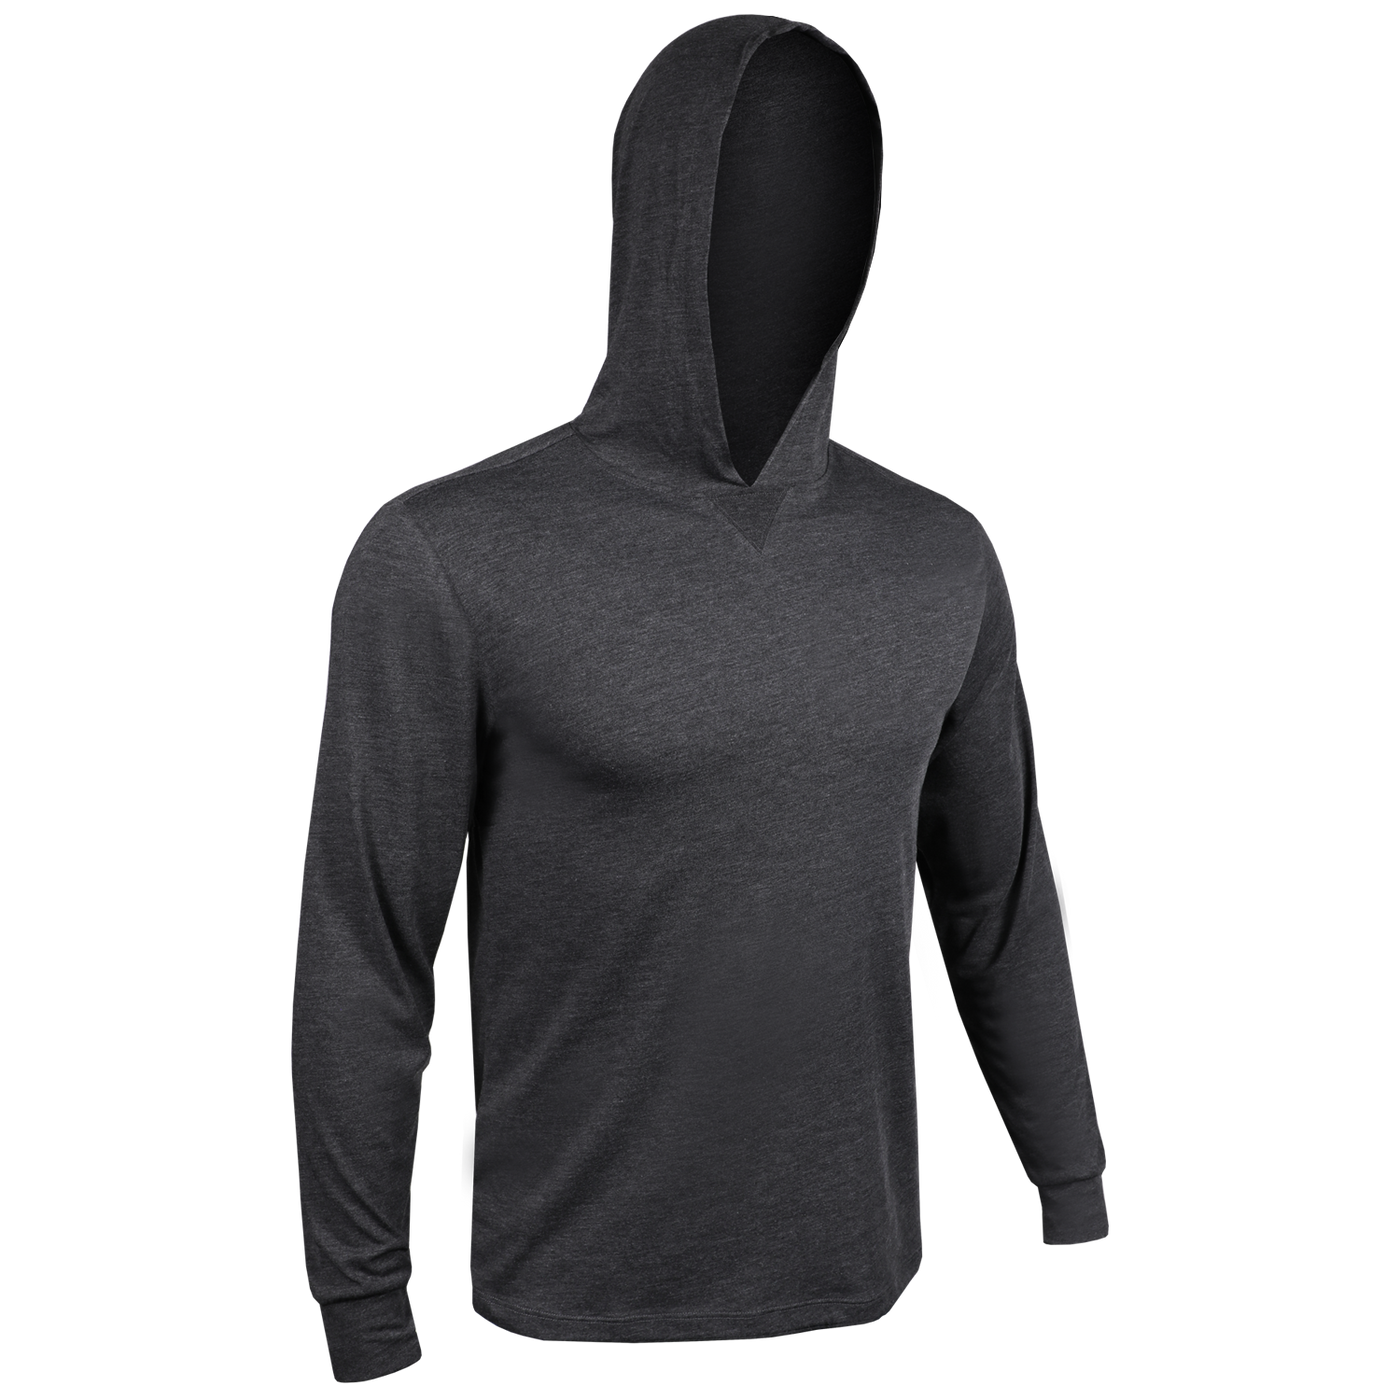 All Day Long Sleeve Hooded Tee - Heathered Charcoal